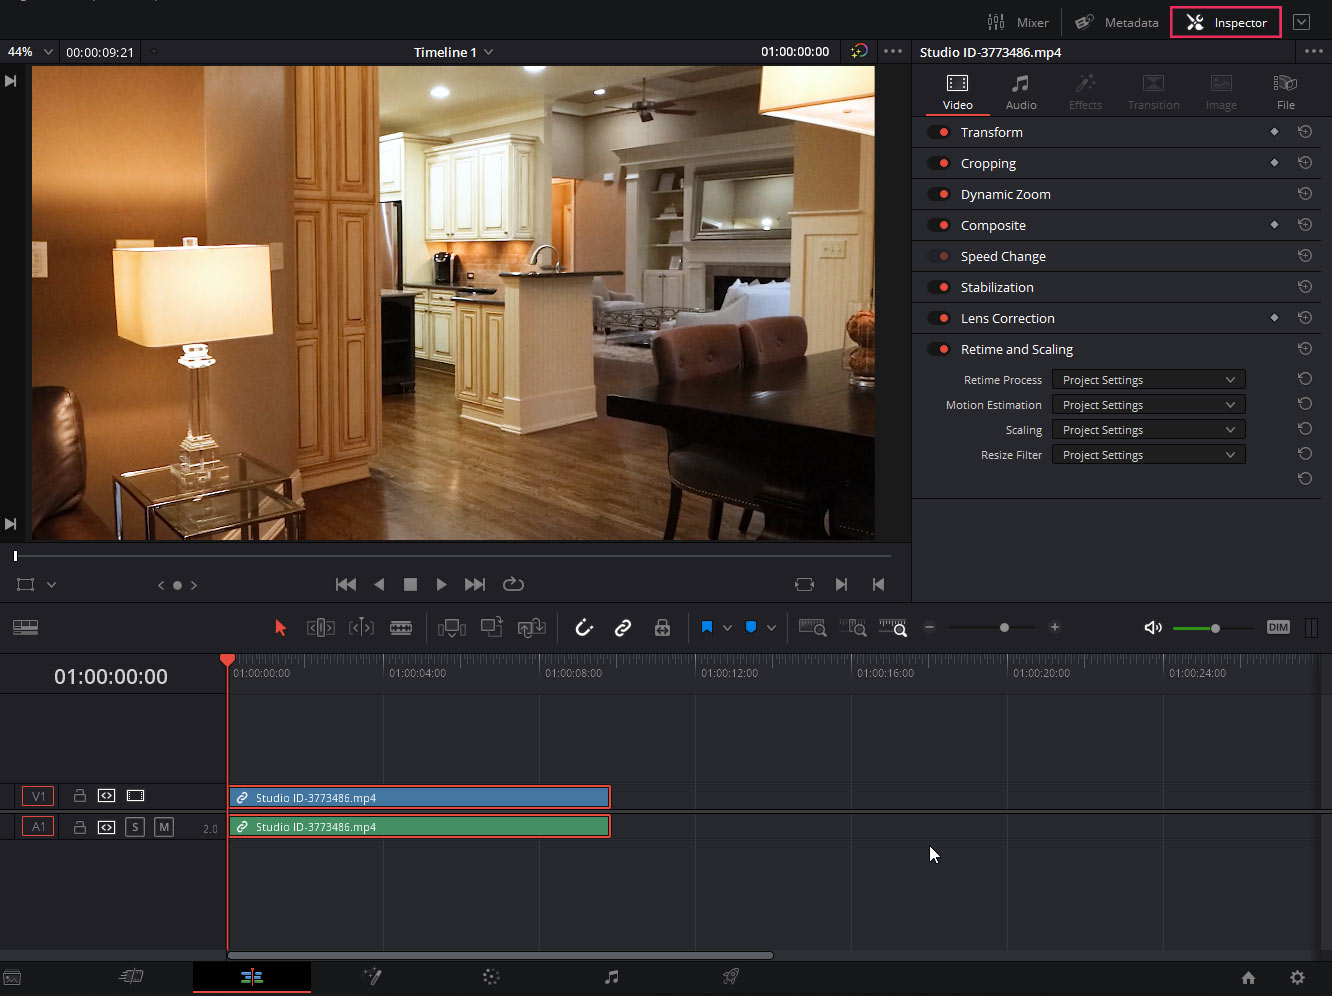 Location of the Inspector Panel in Davinci Resolve